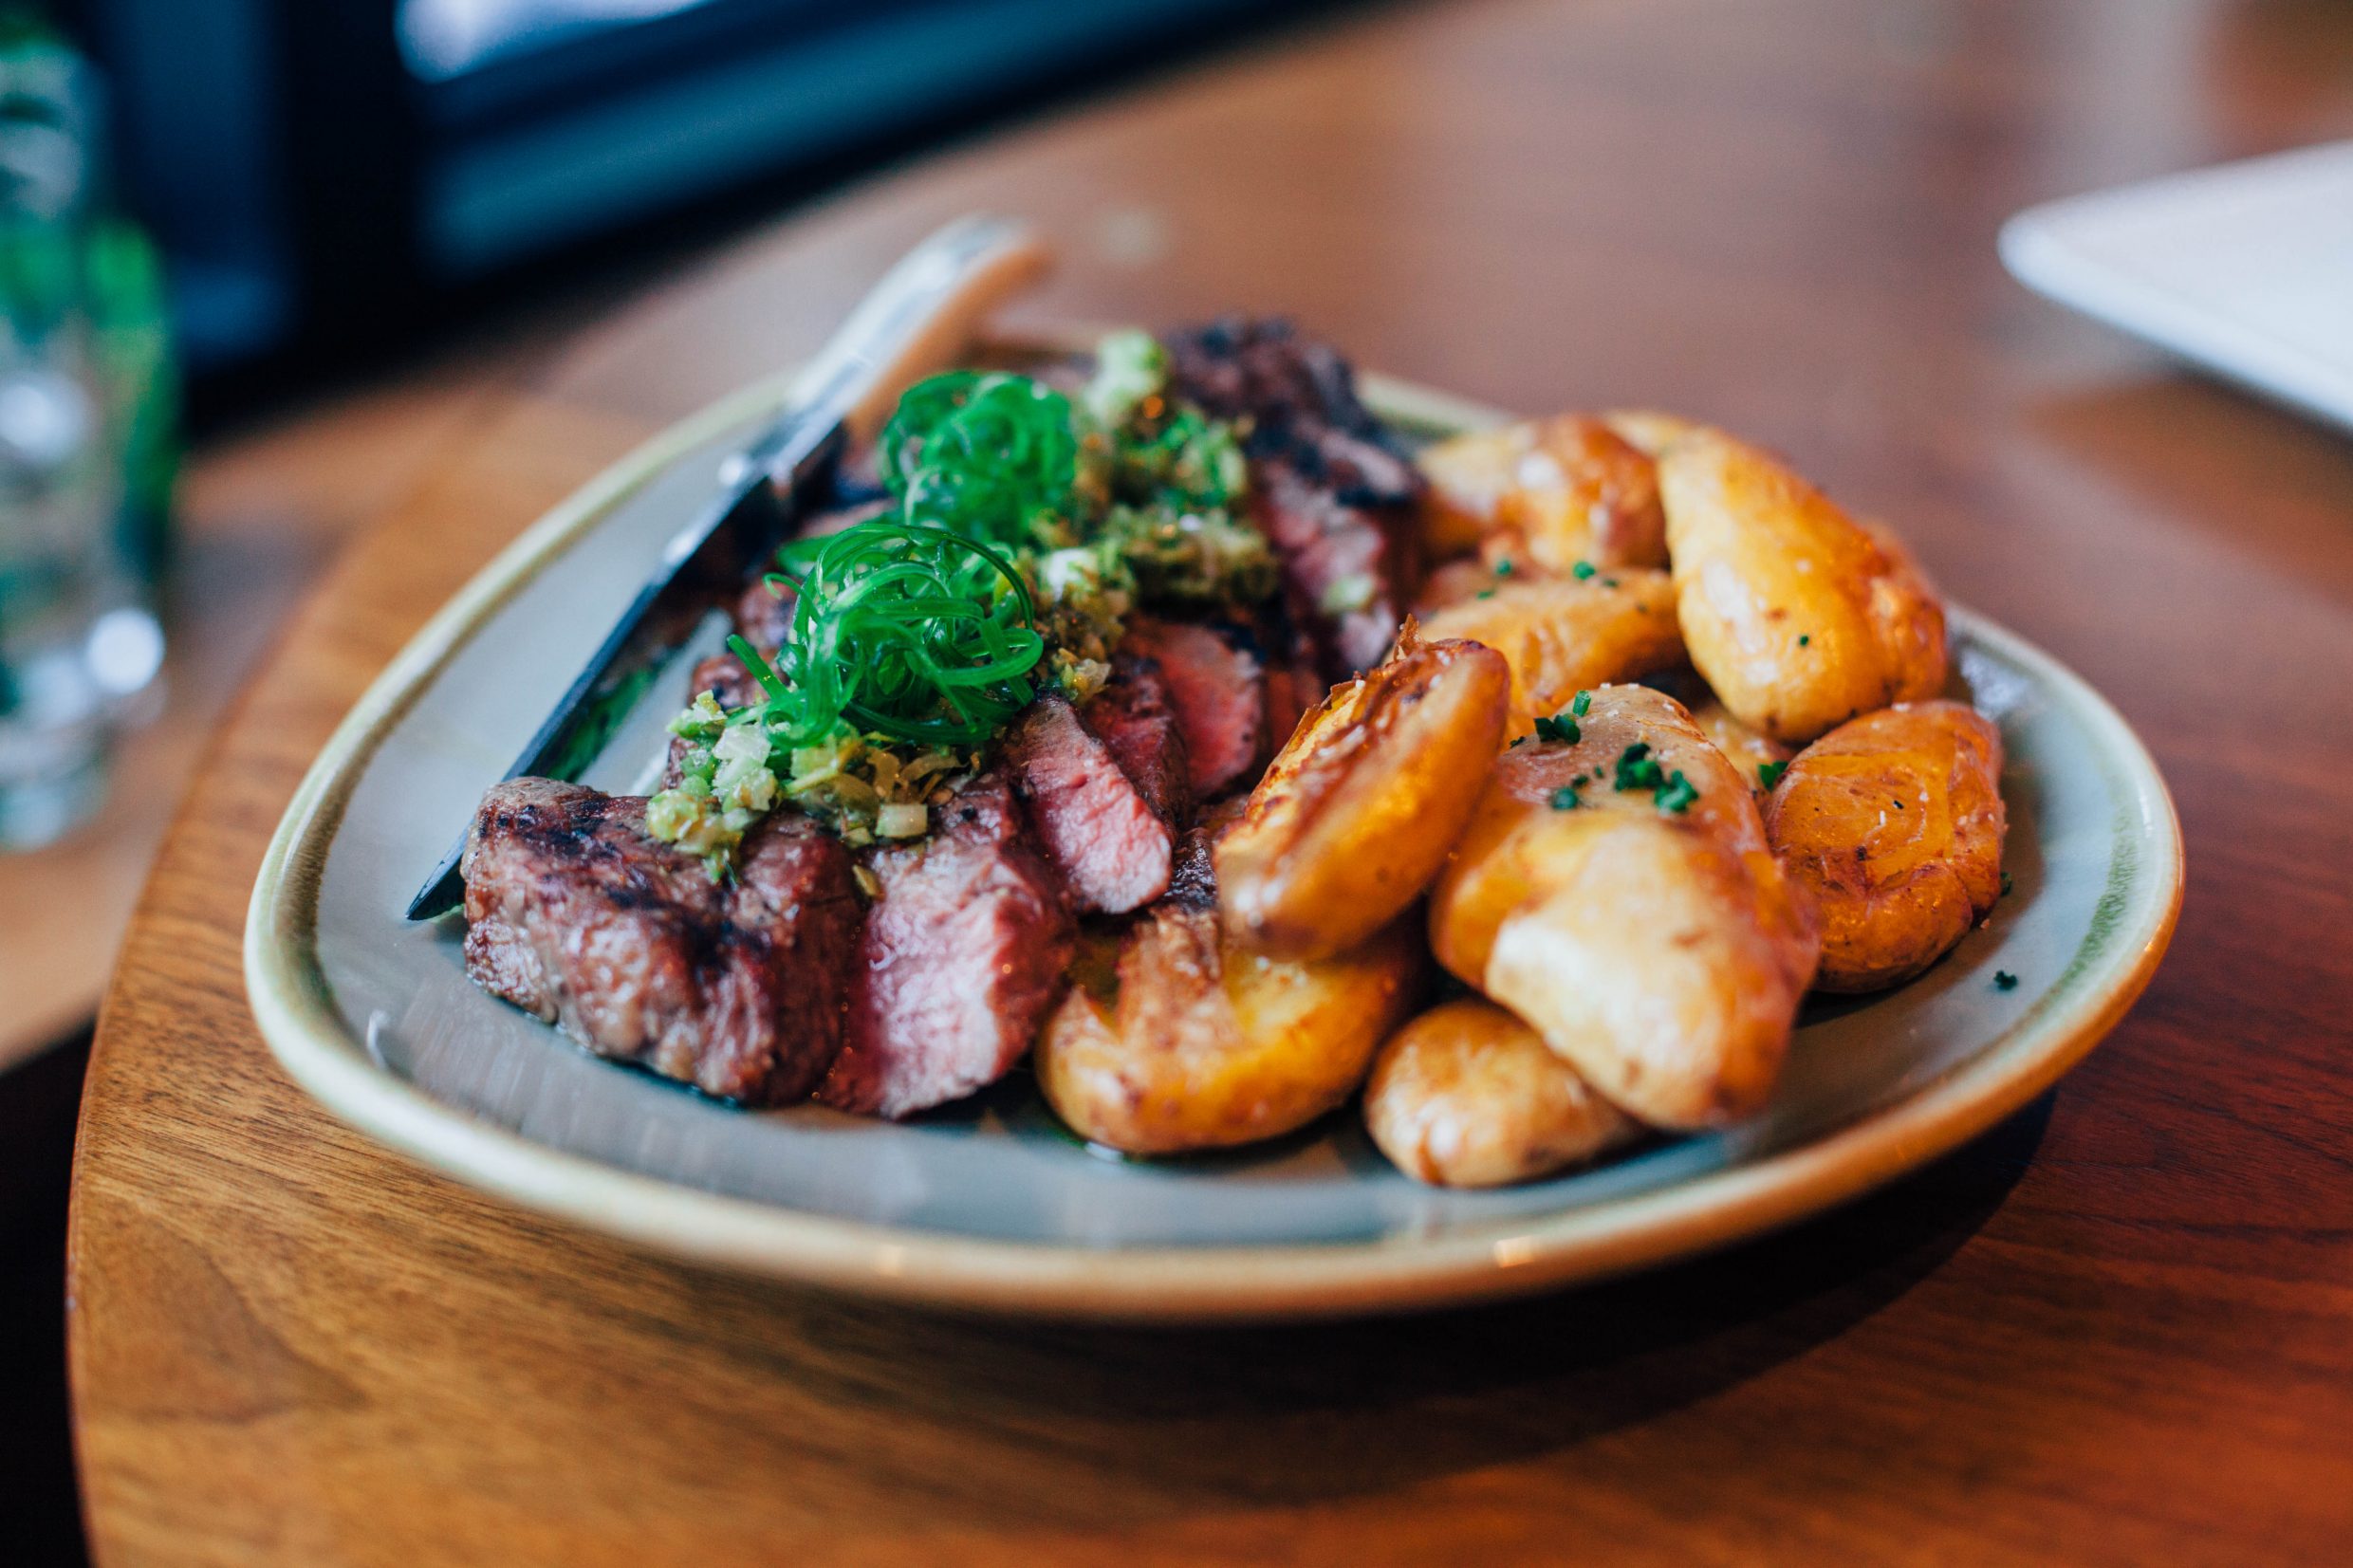 Tredici Enoteca - NY Strip Steak | A weekend in Washington, D.C. | Travel and Food Guide